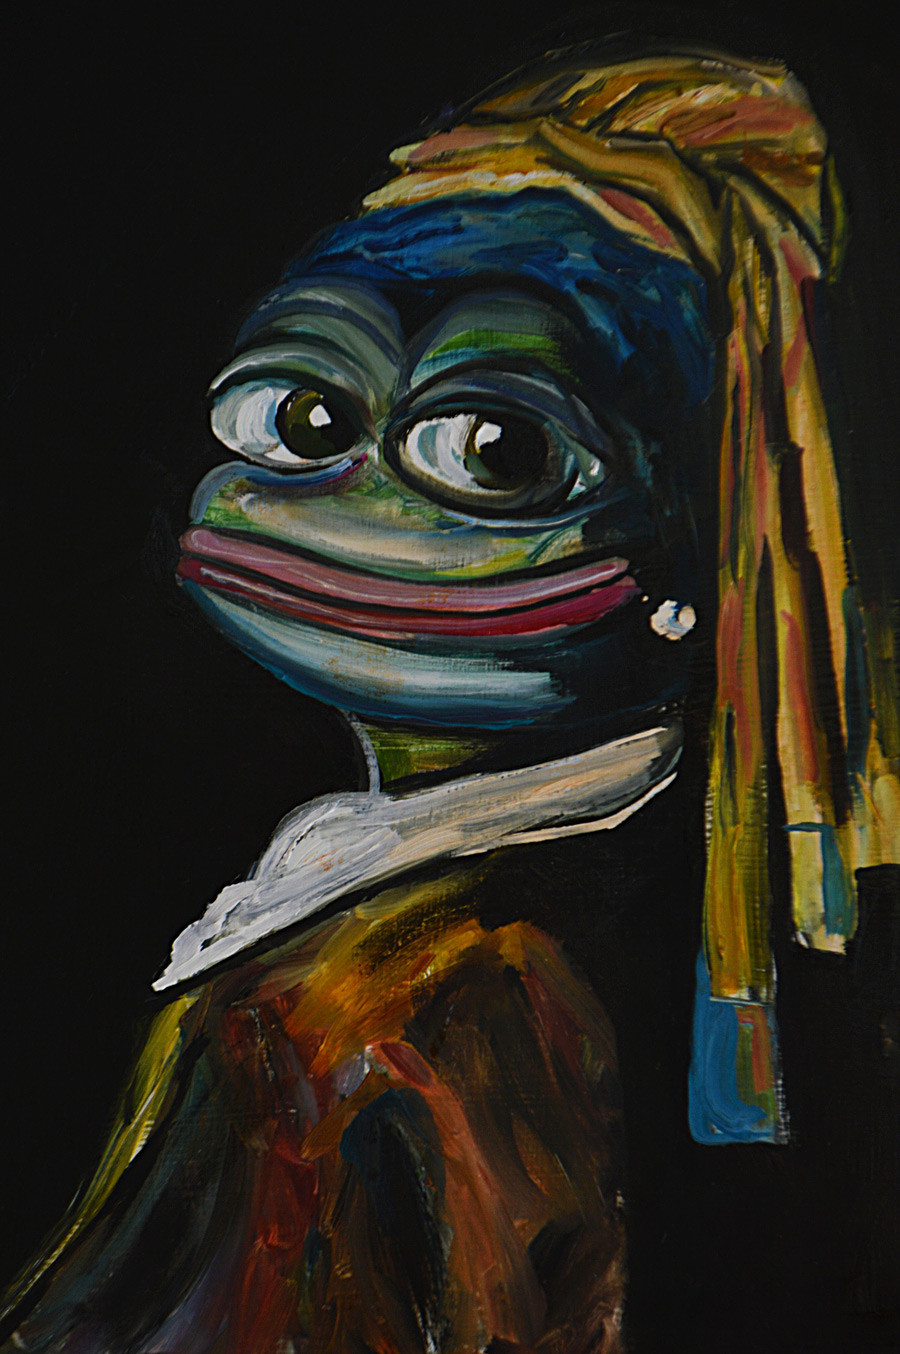 Pepe with a Pearl Earring (based on Girl with a Pearl Earring by Jan Vermeer).